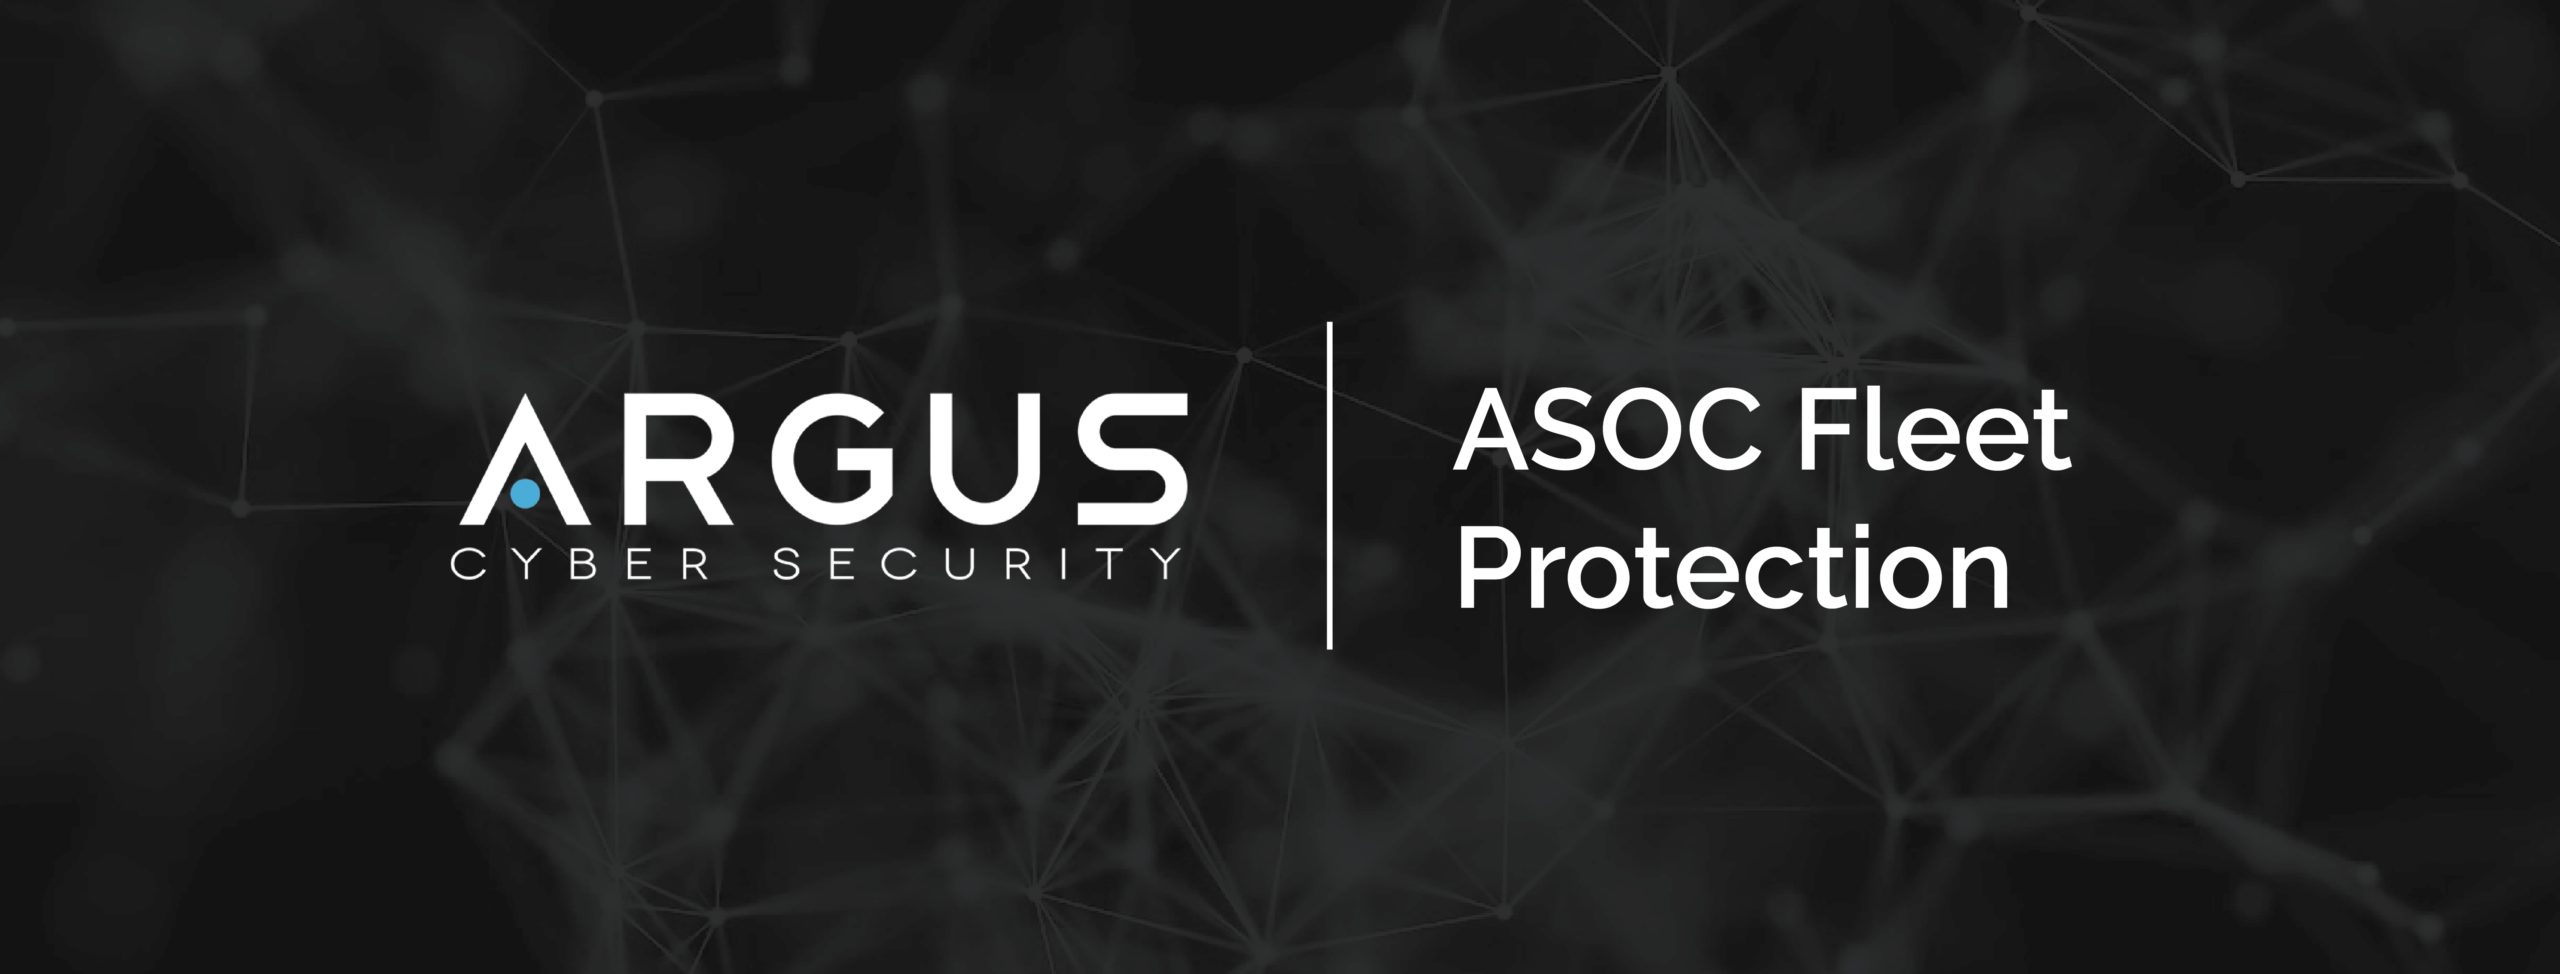 Argus Fleet Protection Now Operational in both Automotive and Commercial Aircraft Fleets